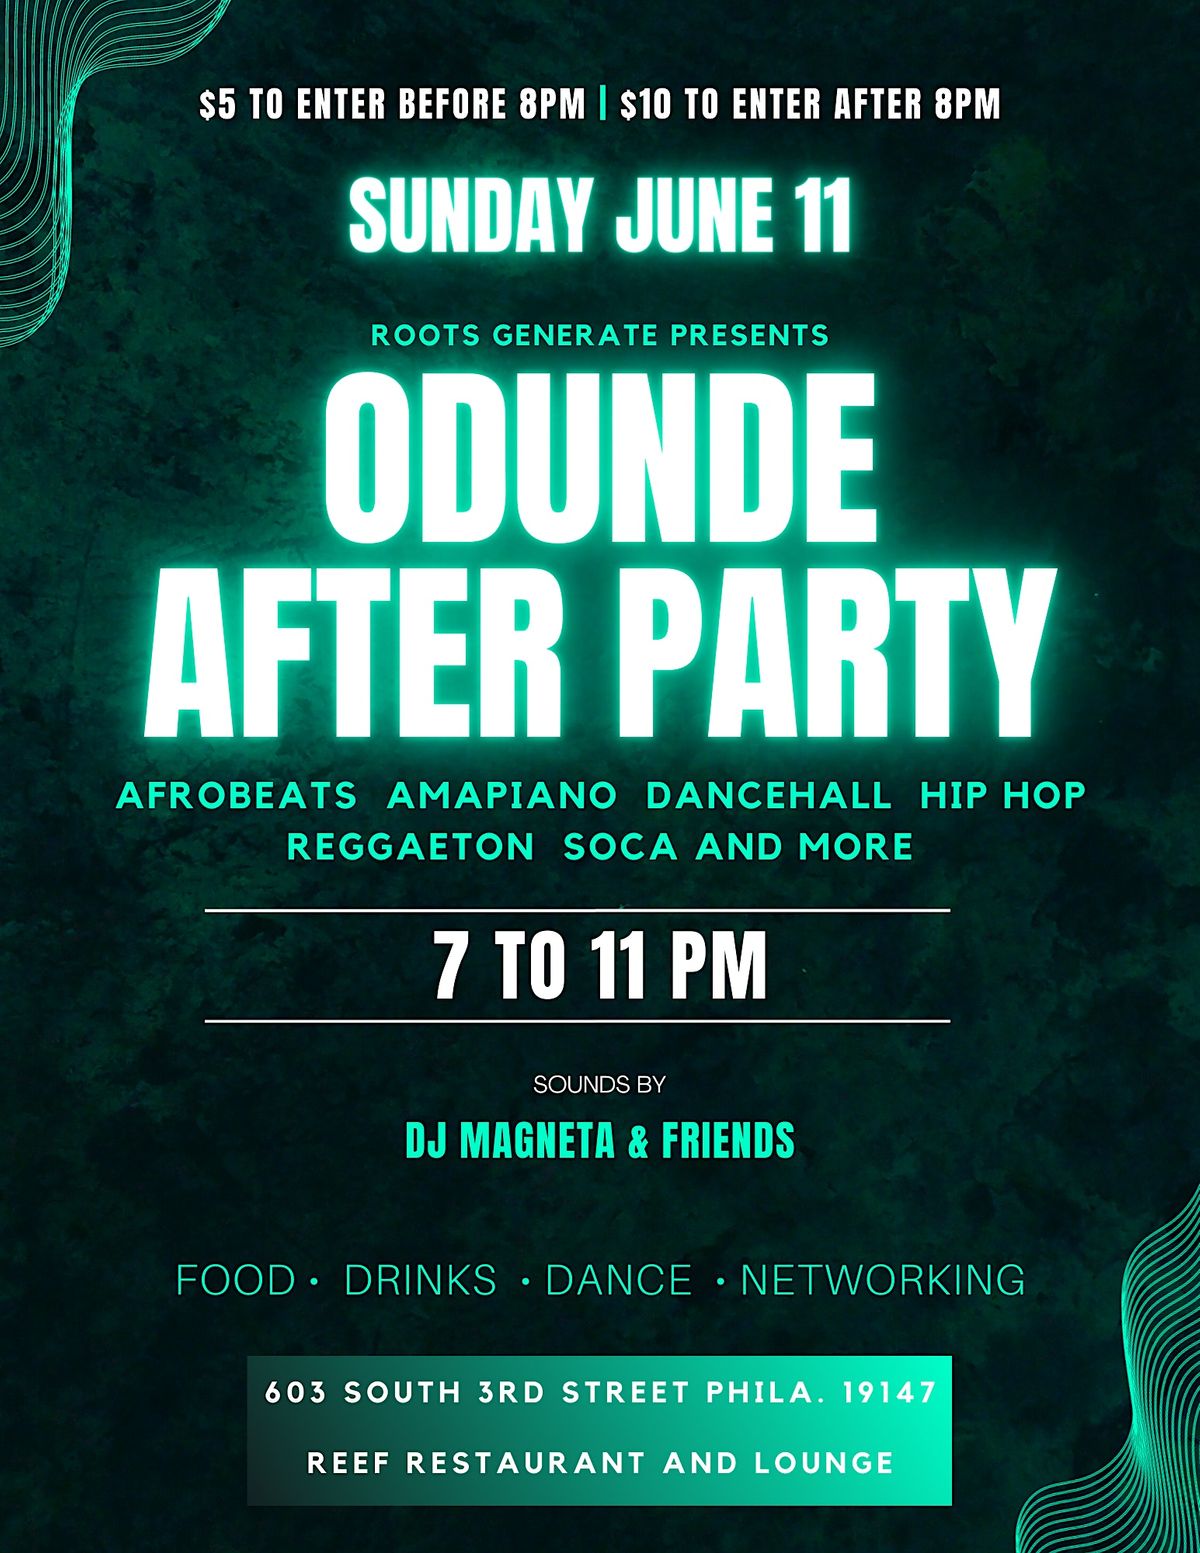 ODUNDE AFTER PARTY!